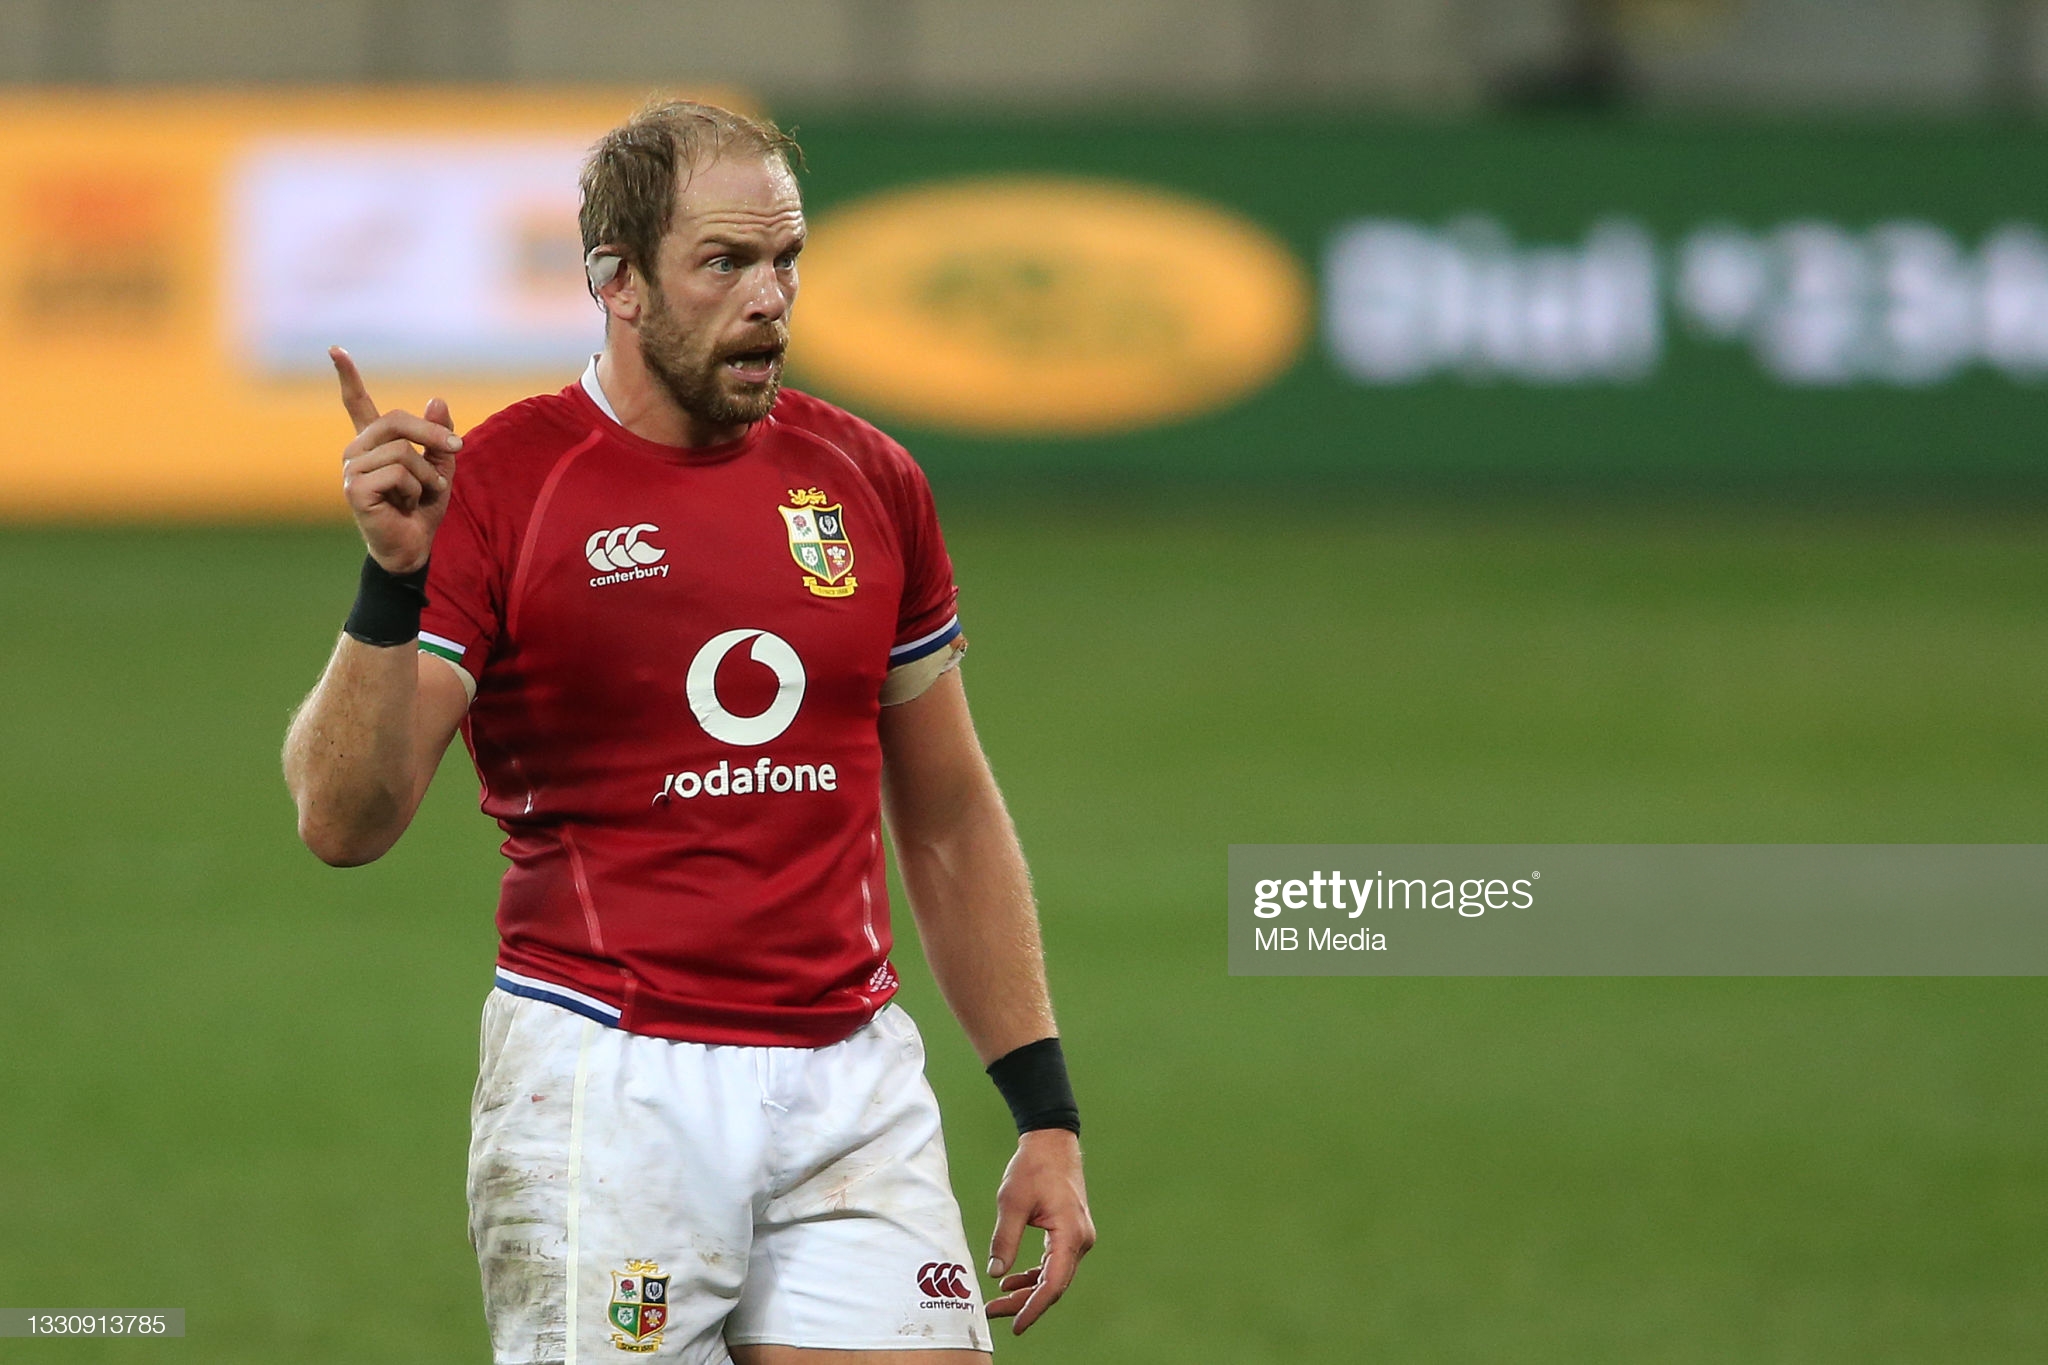 Alun Wyn Jones Joins Graham Price On Lions Elevenes But Denies Respect Was One-Sided In First Test